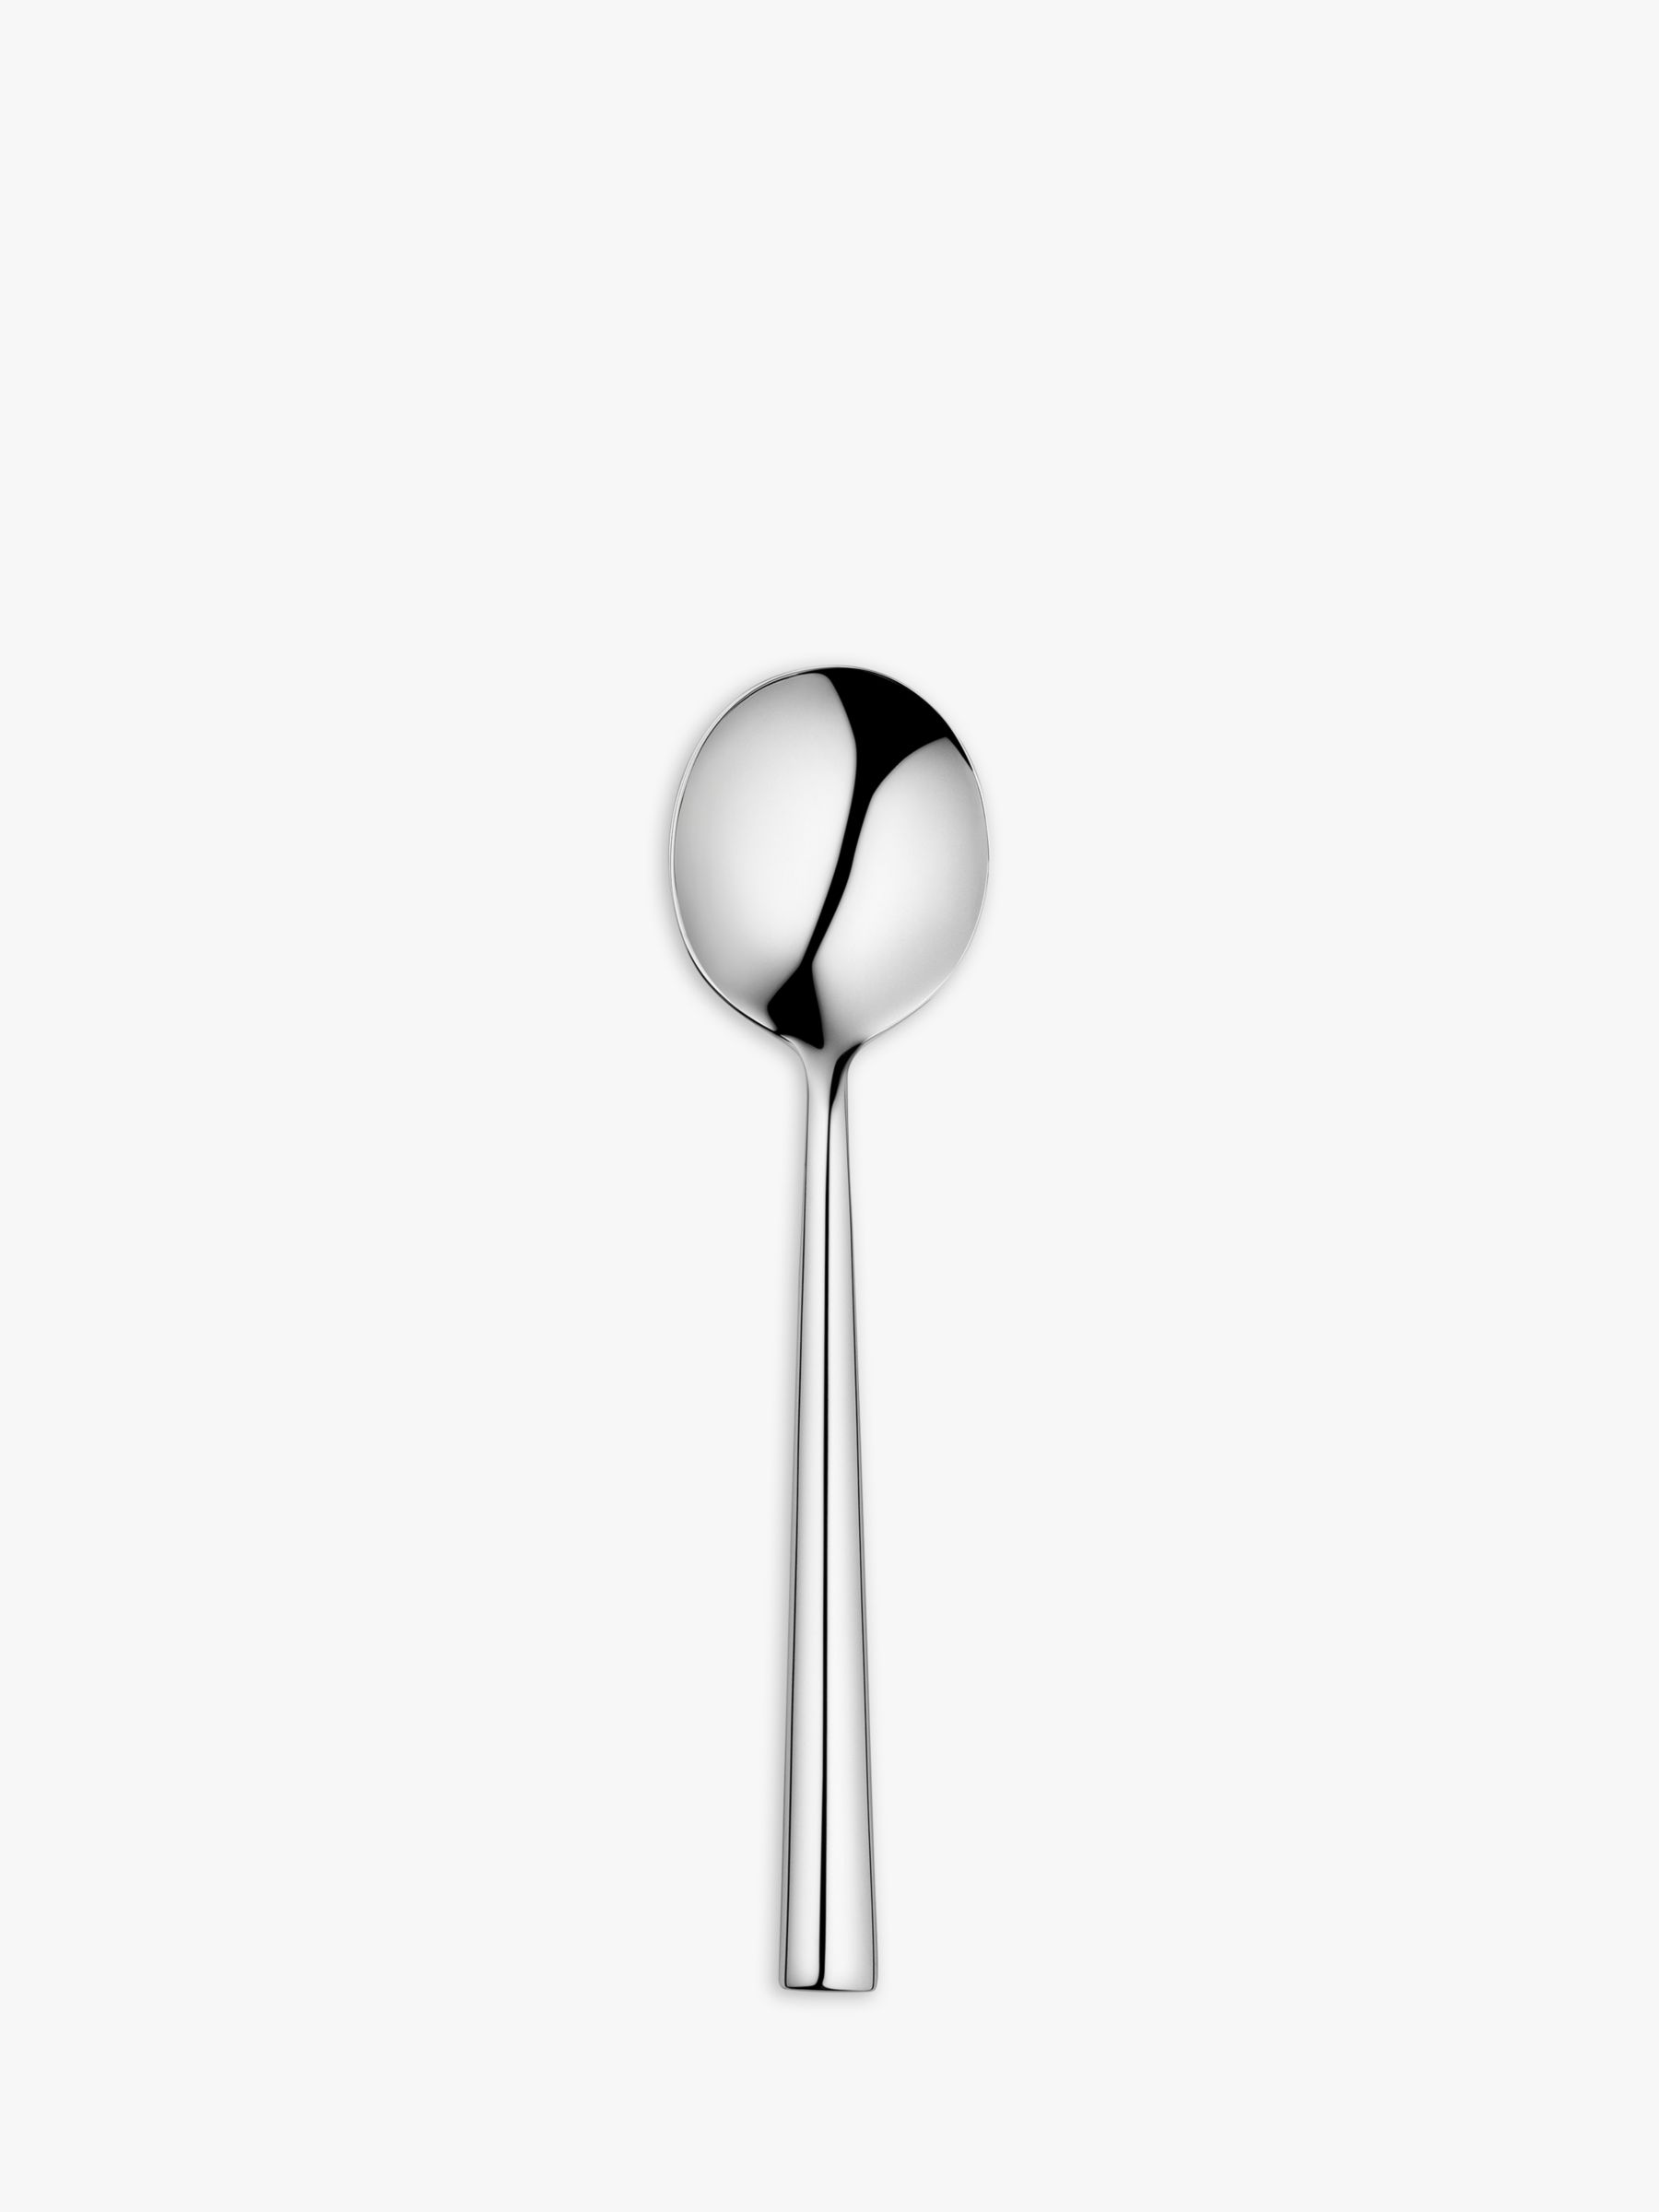 Ovation Soup Spoon, Stainless Steel